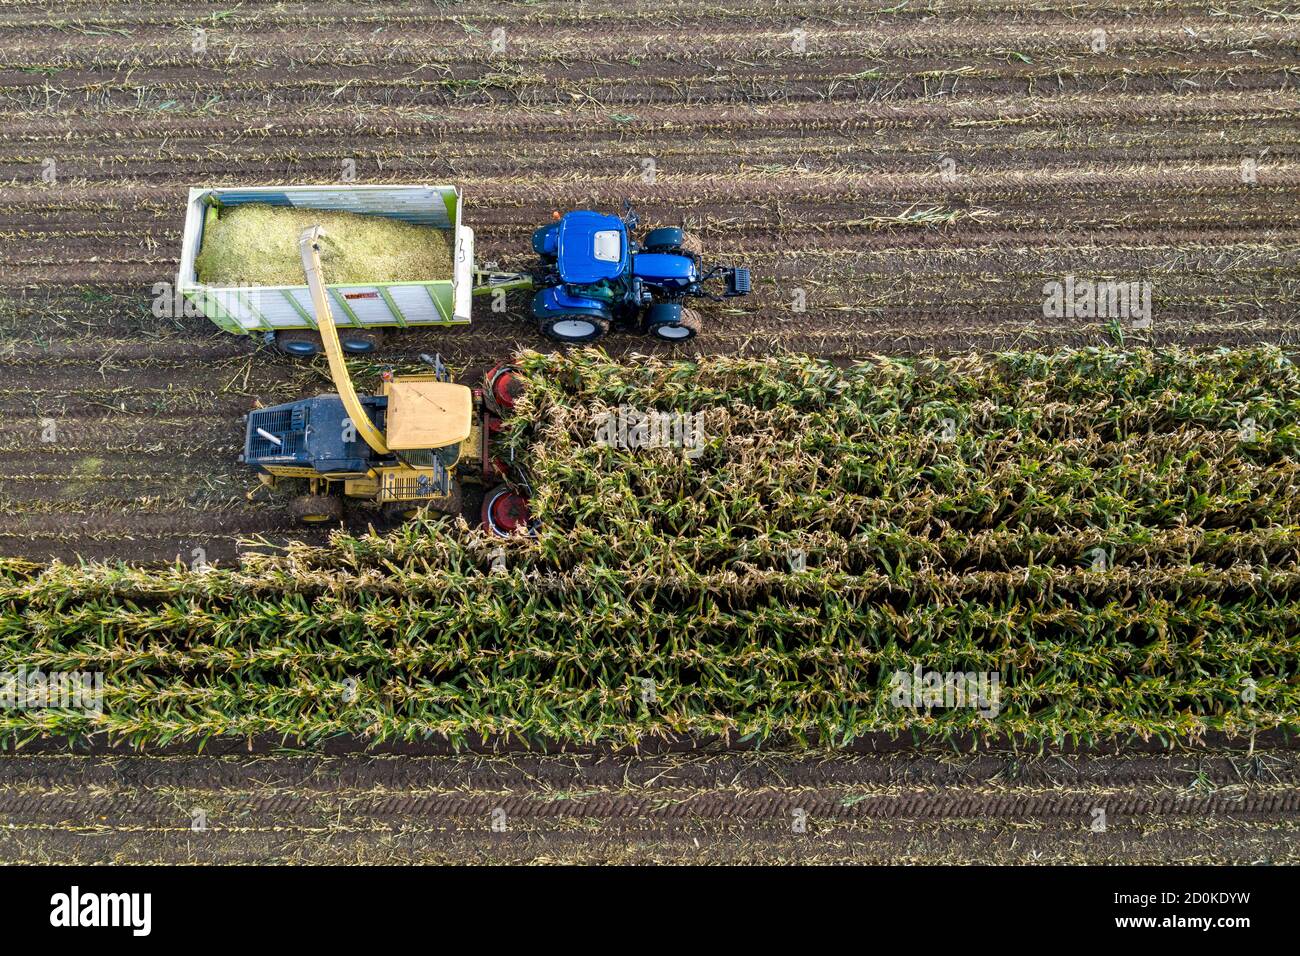 Maize harvest, combine harvester, chopper works its way through a maize field, silage is pumped directly into a trailer, serves as animal feed, Lower Stock Photo